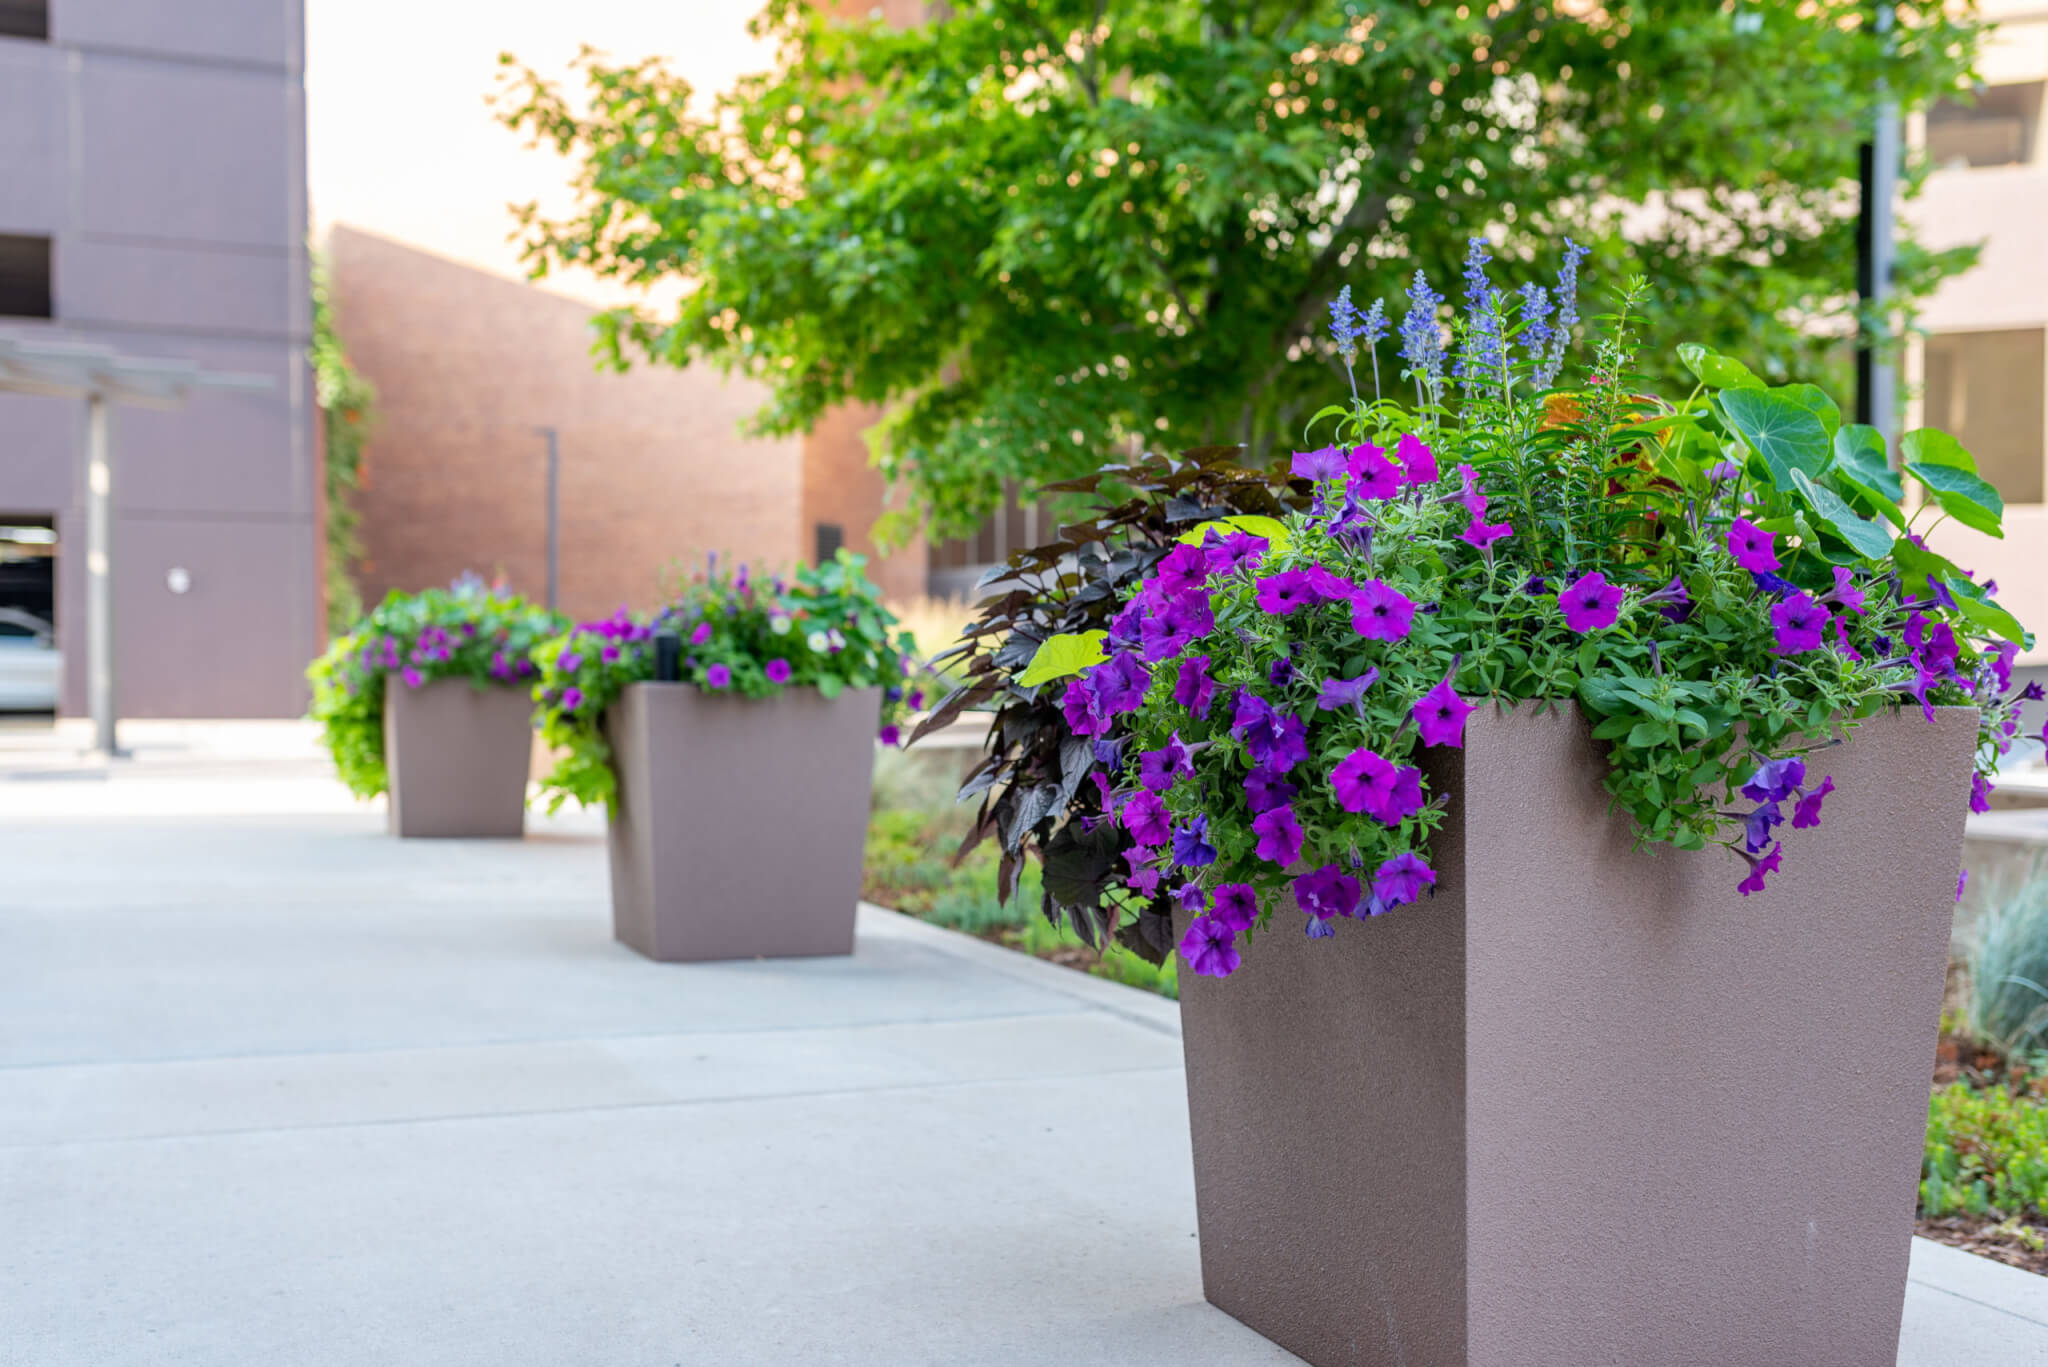 A big flower pots filled with plants and colourful flower plants on side of the pathway